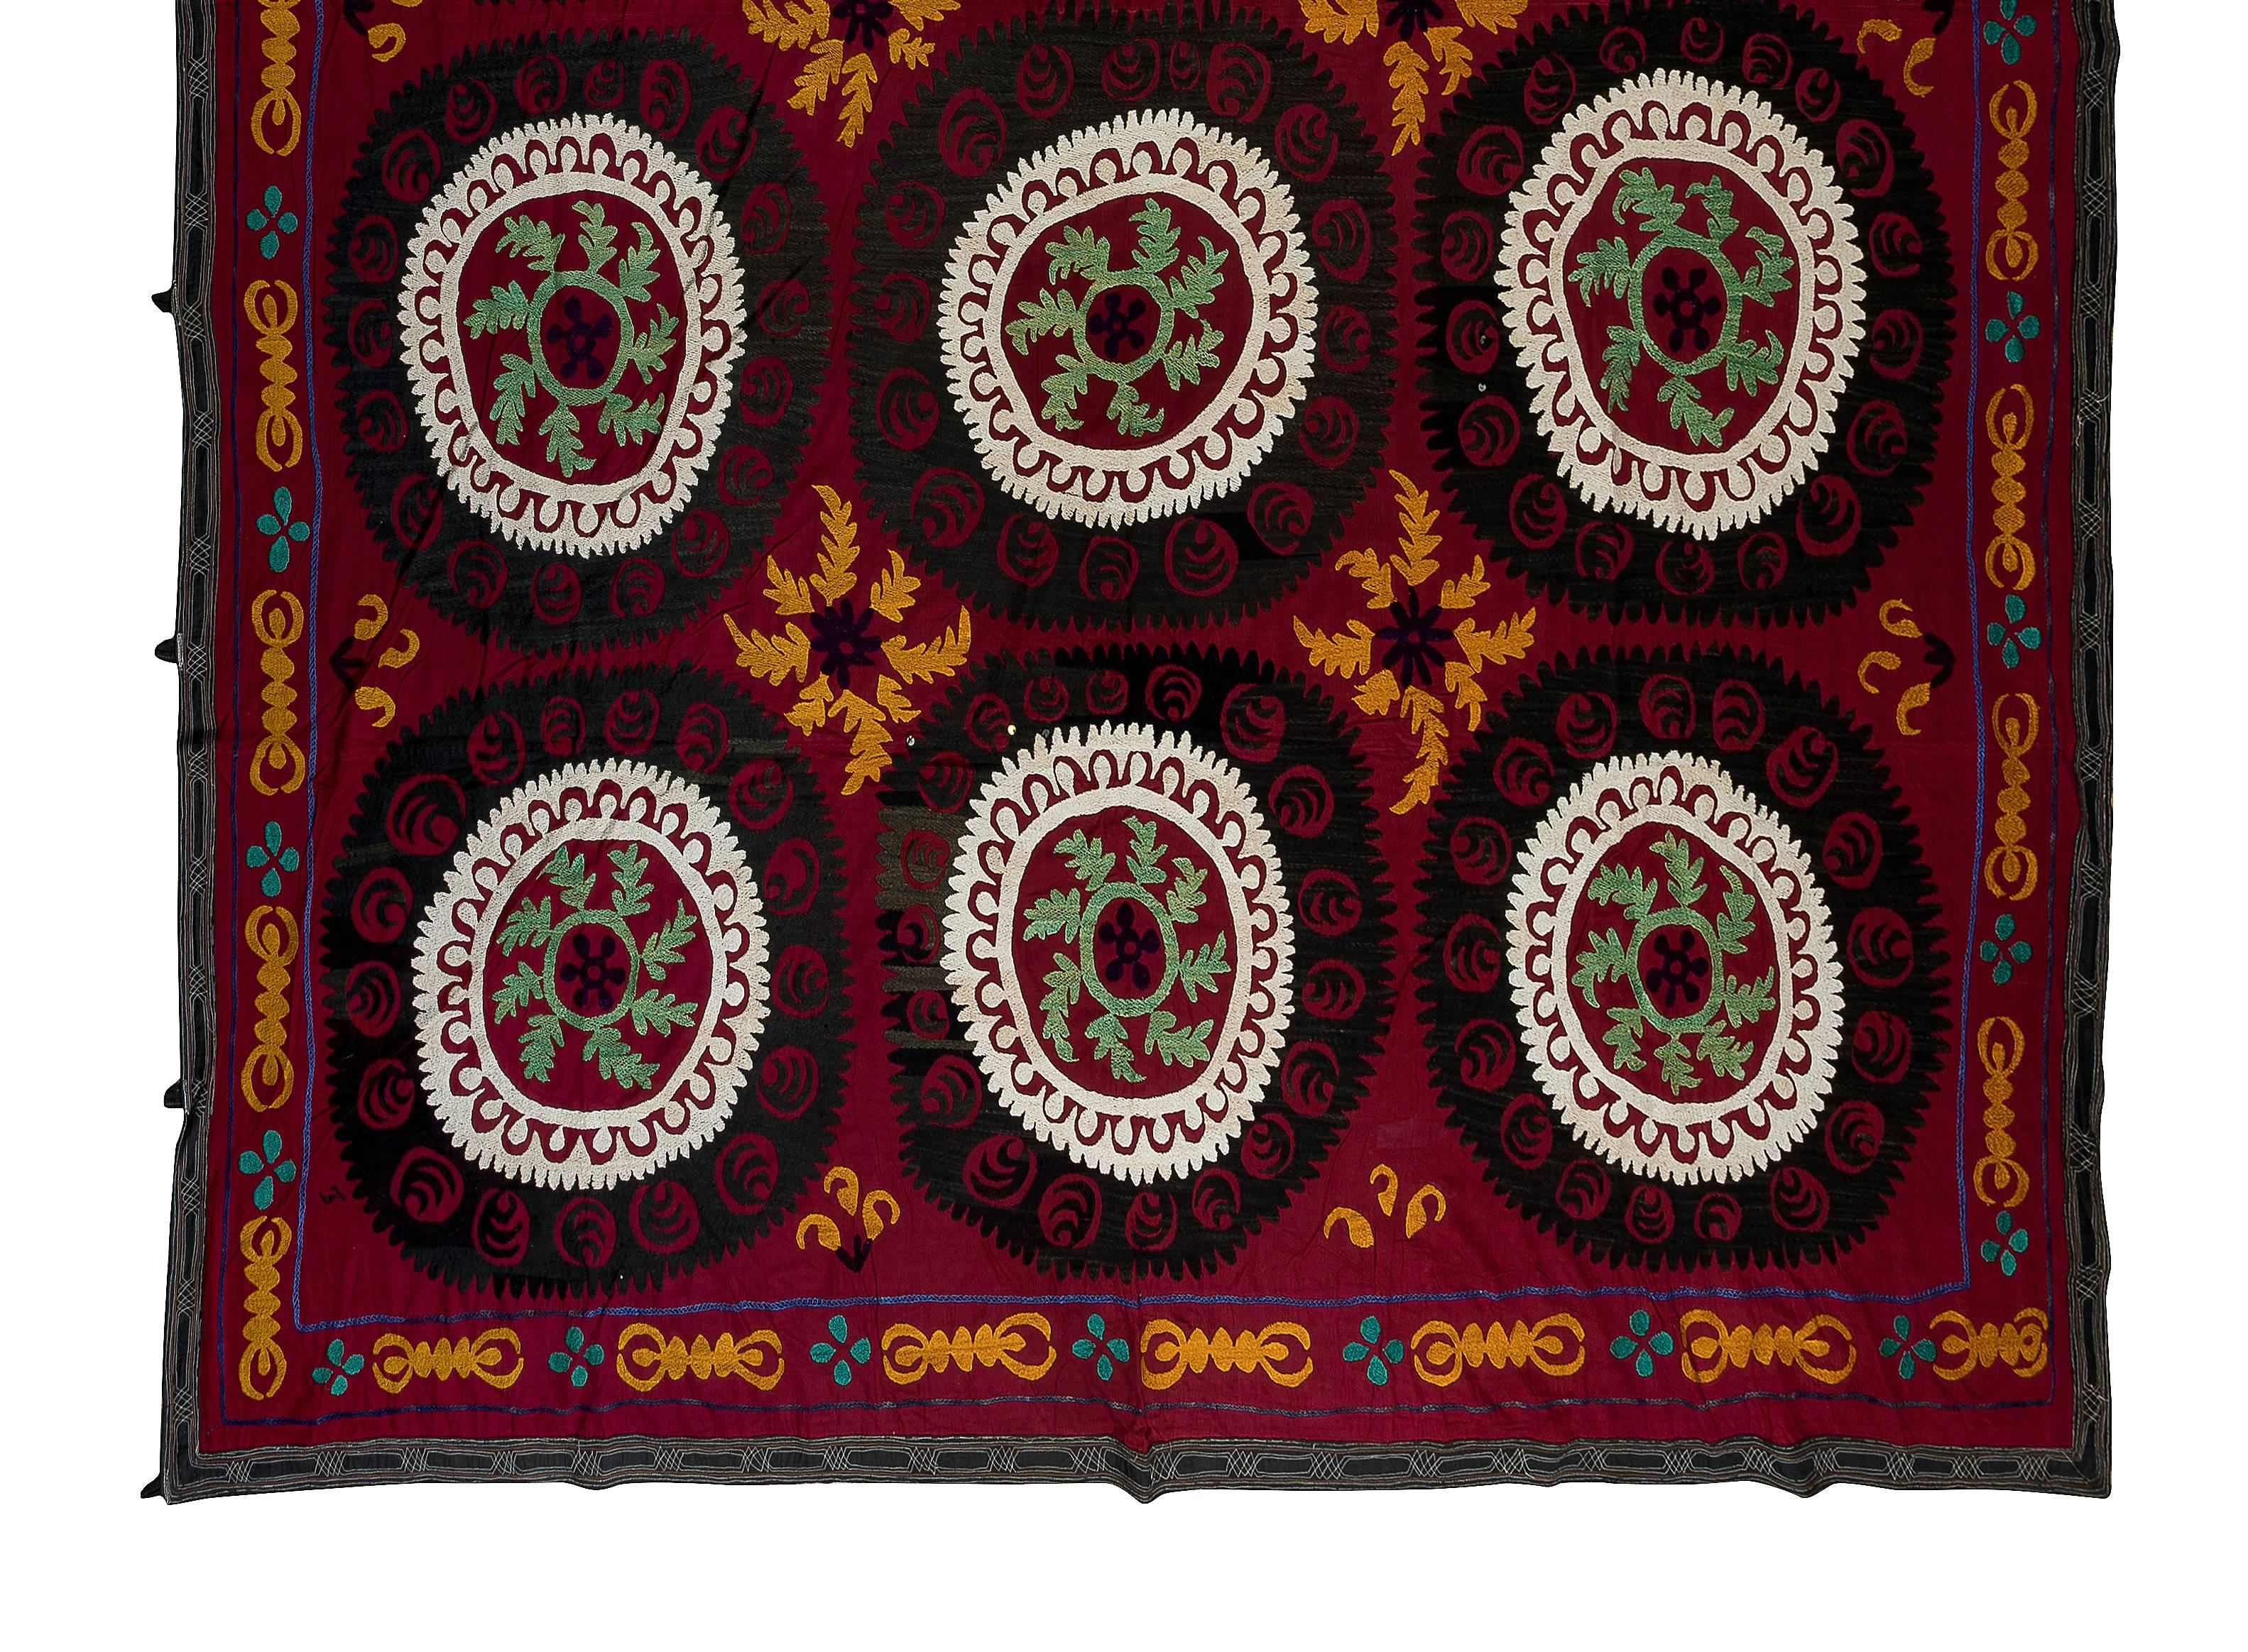 Uzbek Vintage Silk Embroidery Bed Cover, Central Asian Suzani Wall Hanging For Sale